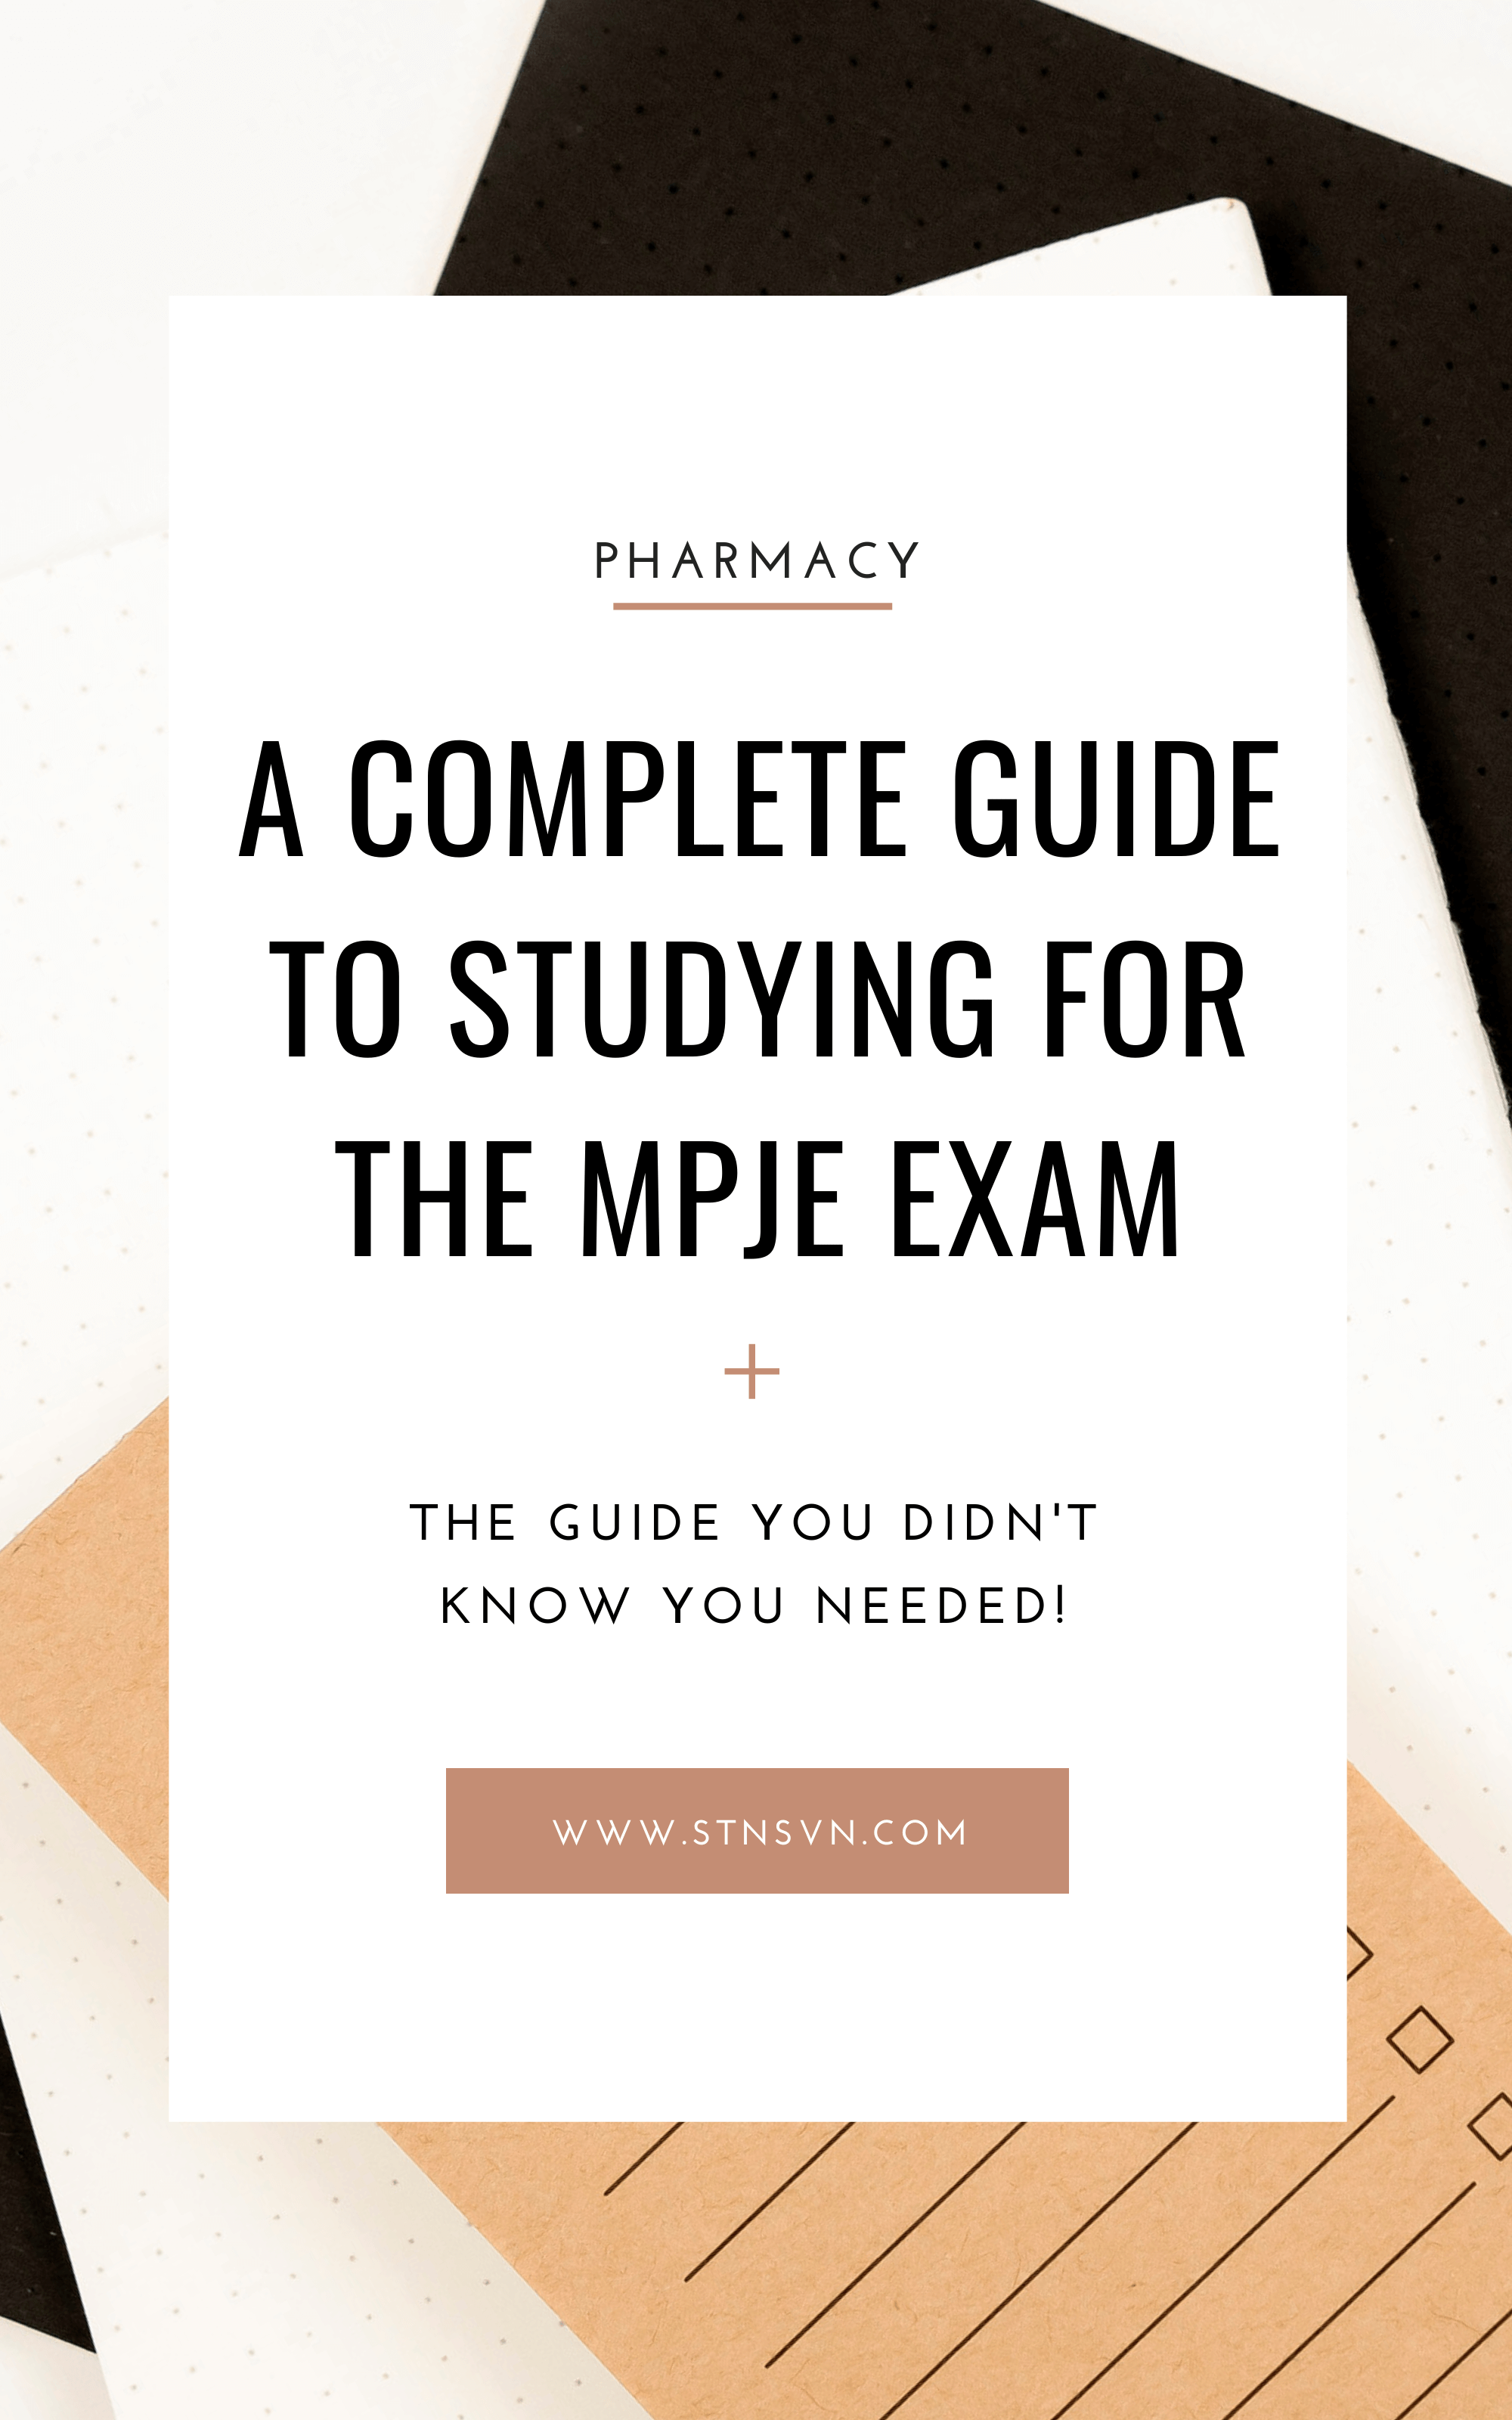 A complete guide to helping you pass the MPJE exam on the first try!